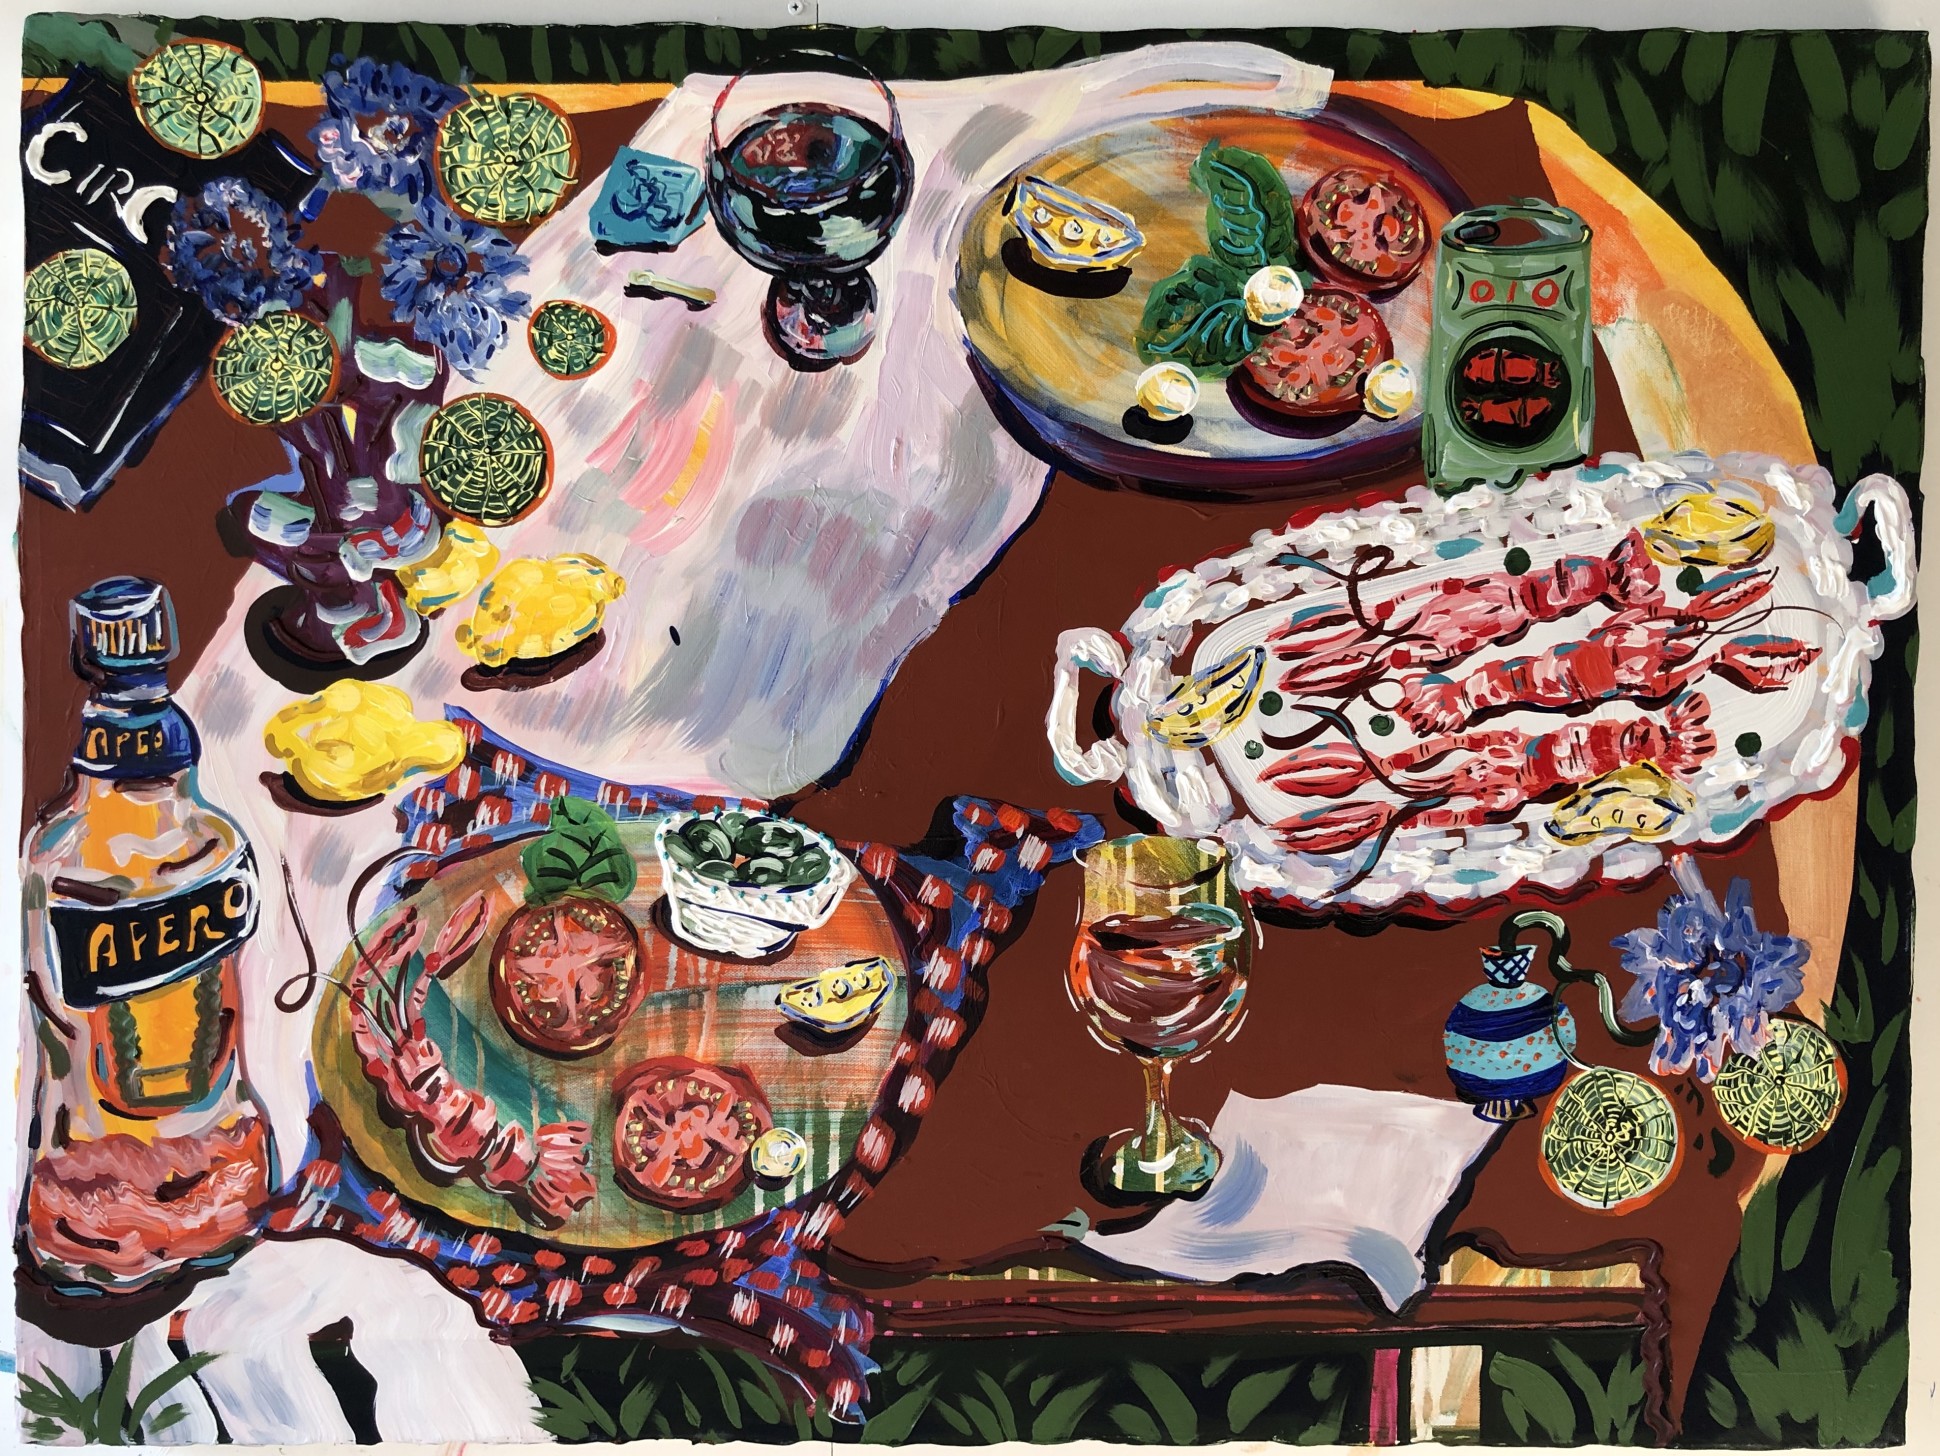 Kate Pincus-Whitney Feast in the Neon Jungle: Circe’s Table, 2020 Acrylic and Polycolor on Canvas 76 x 102 cm. / 30 x 40 in. Courtesy Fredericks & Freiser and copyright of the artist